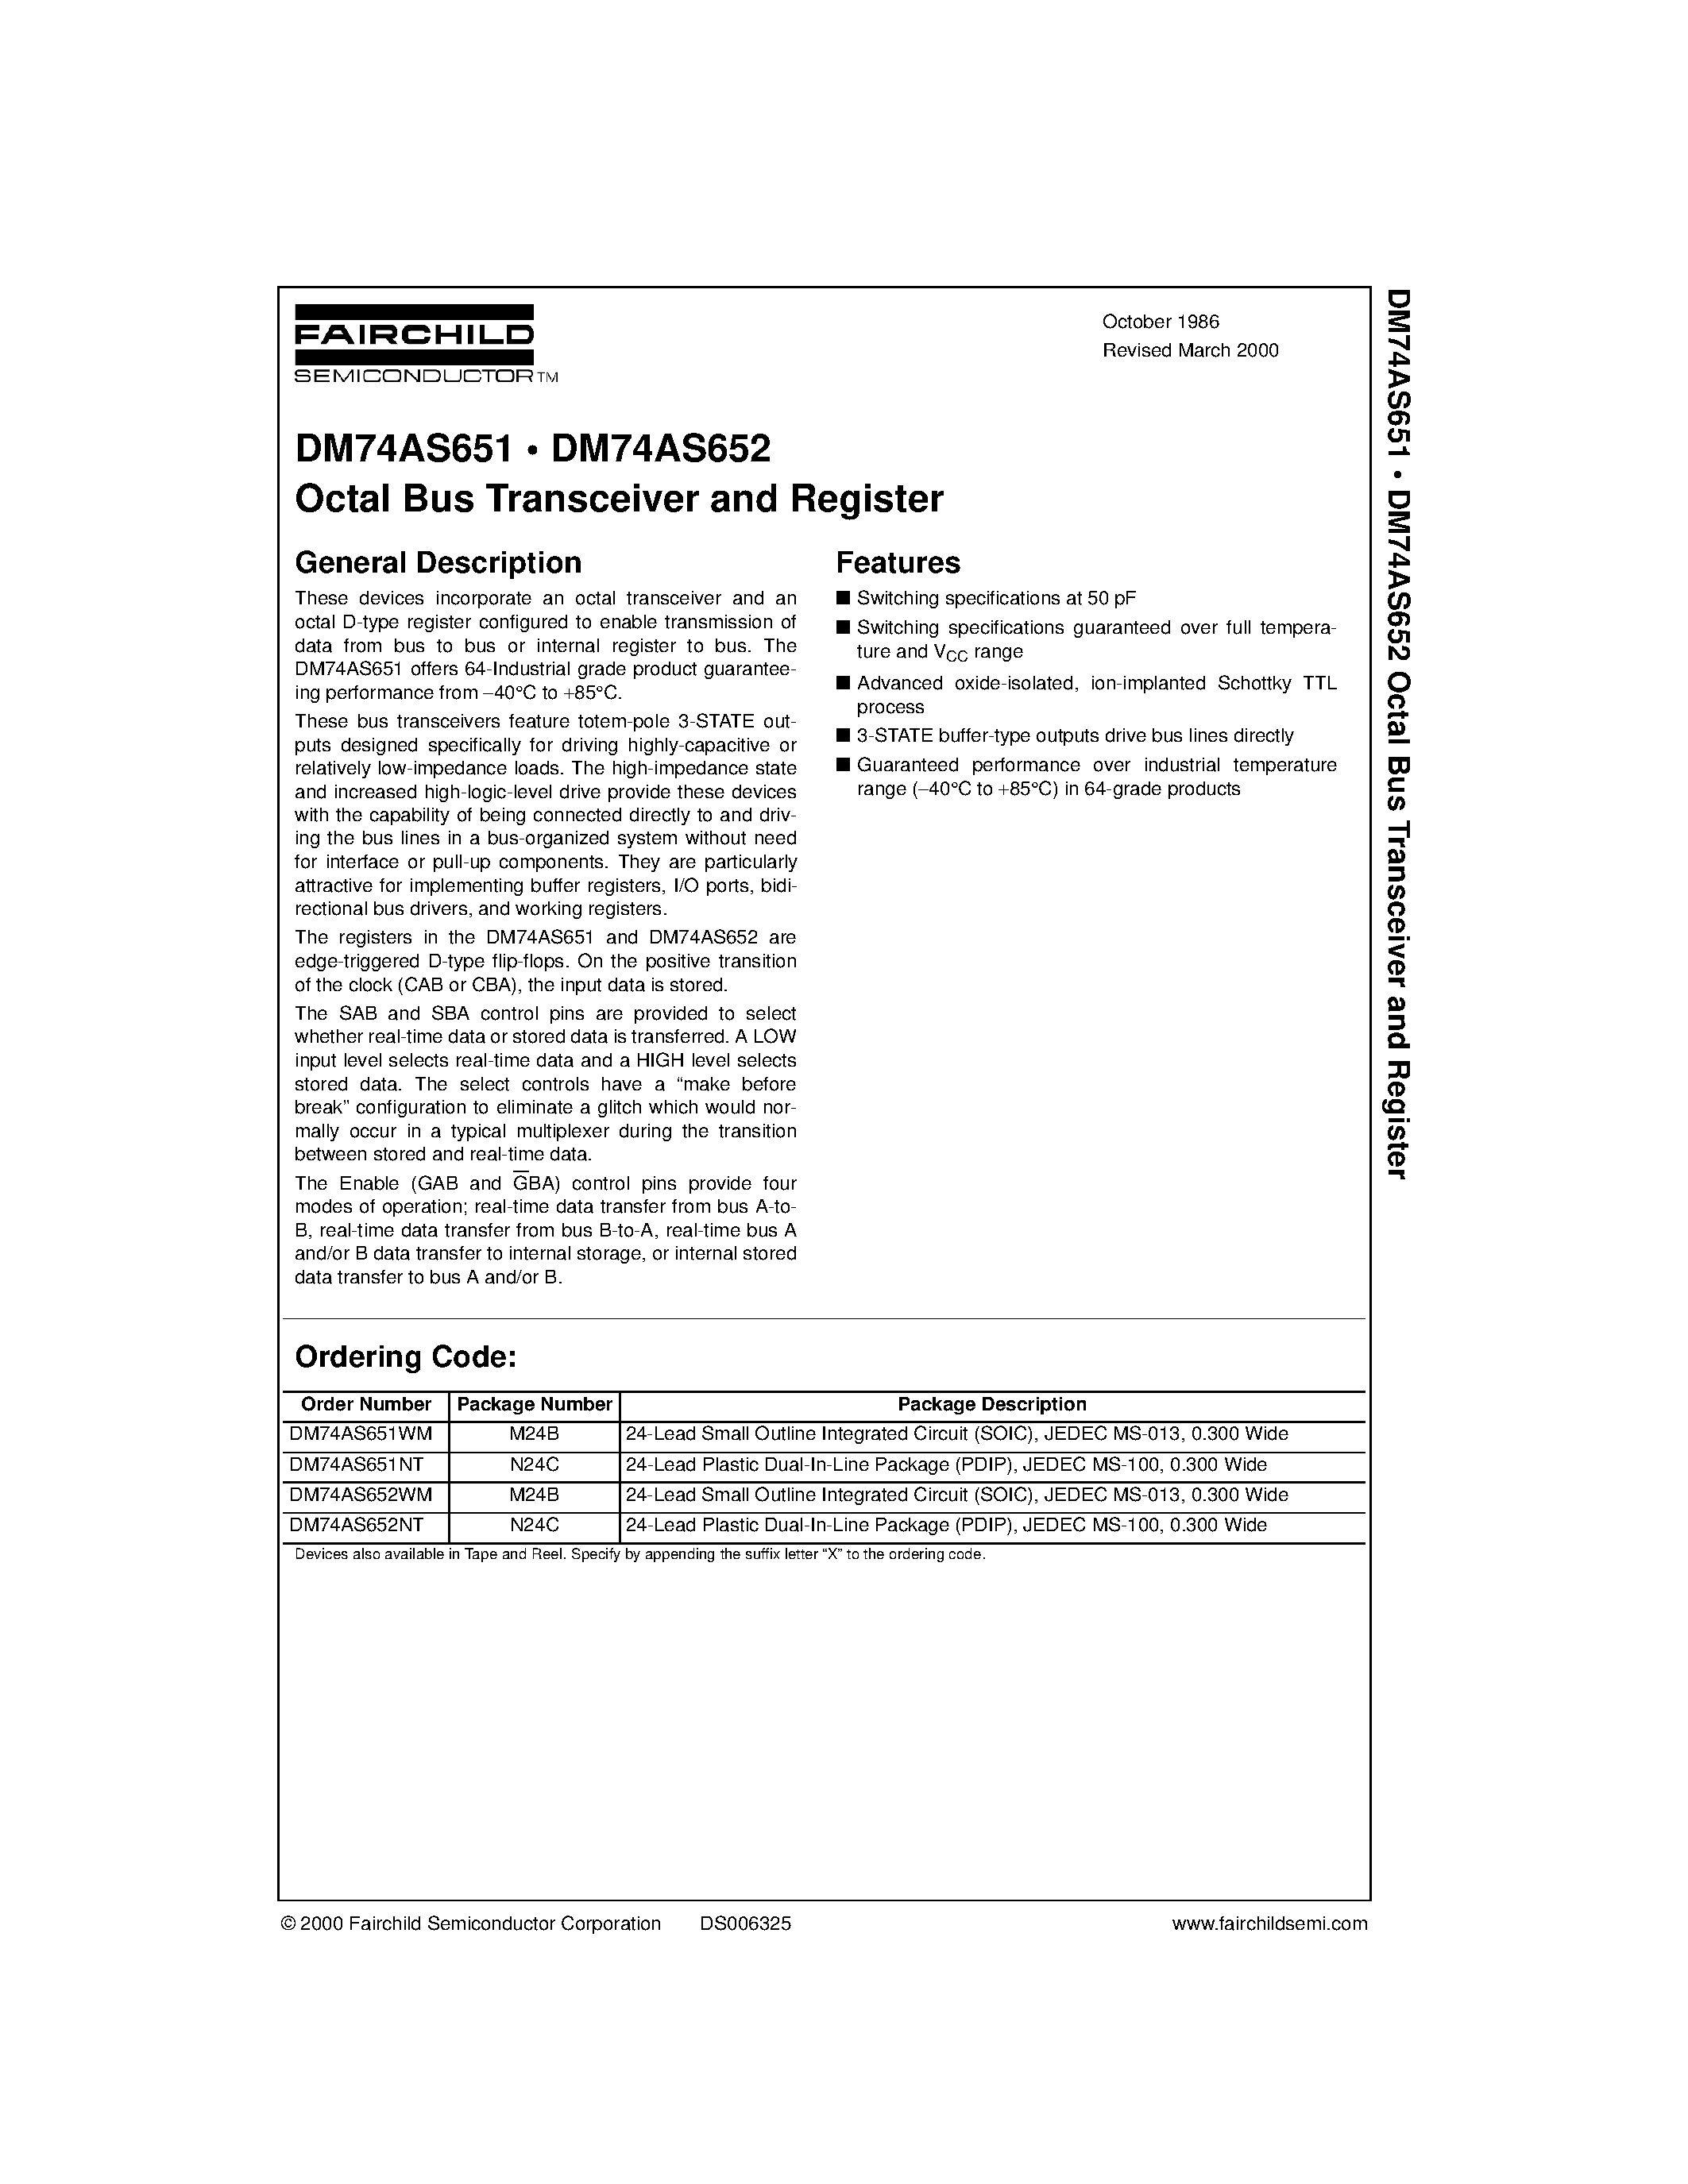 Datasheet DM74AS652NT - Octal Bus Transceiver and Register page 1